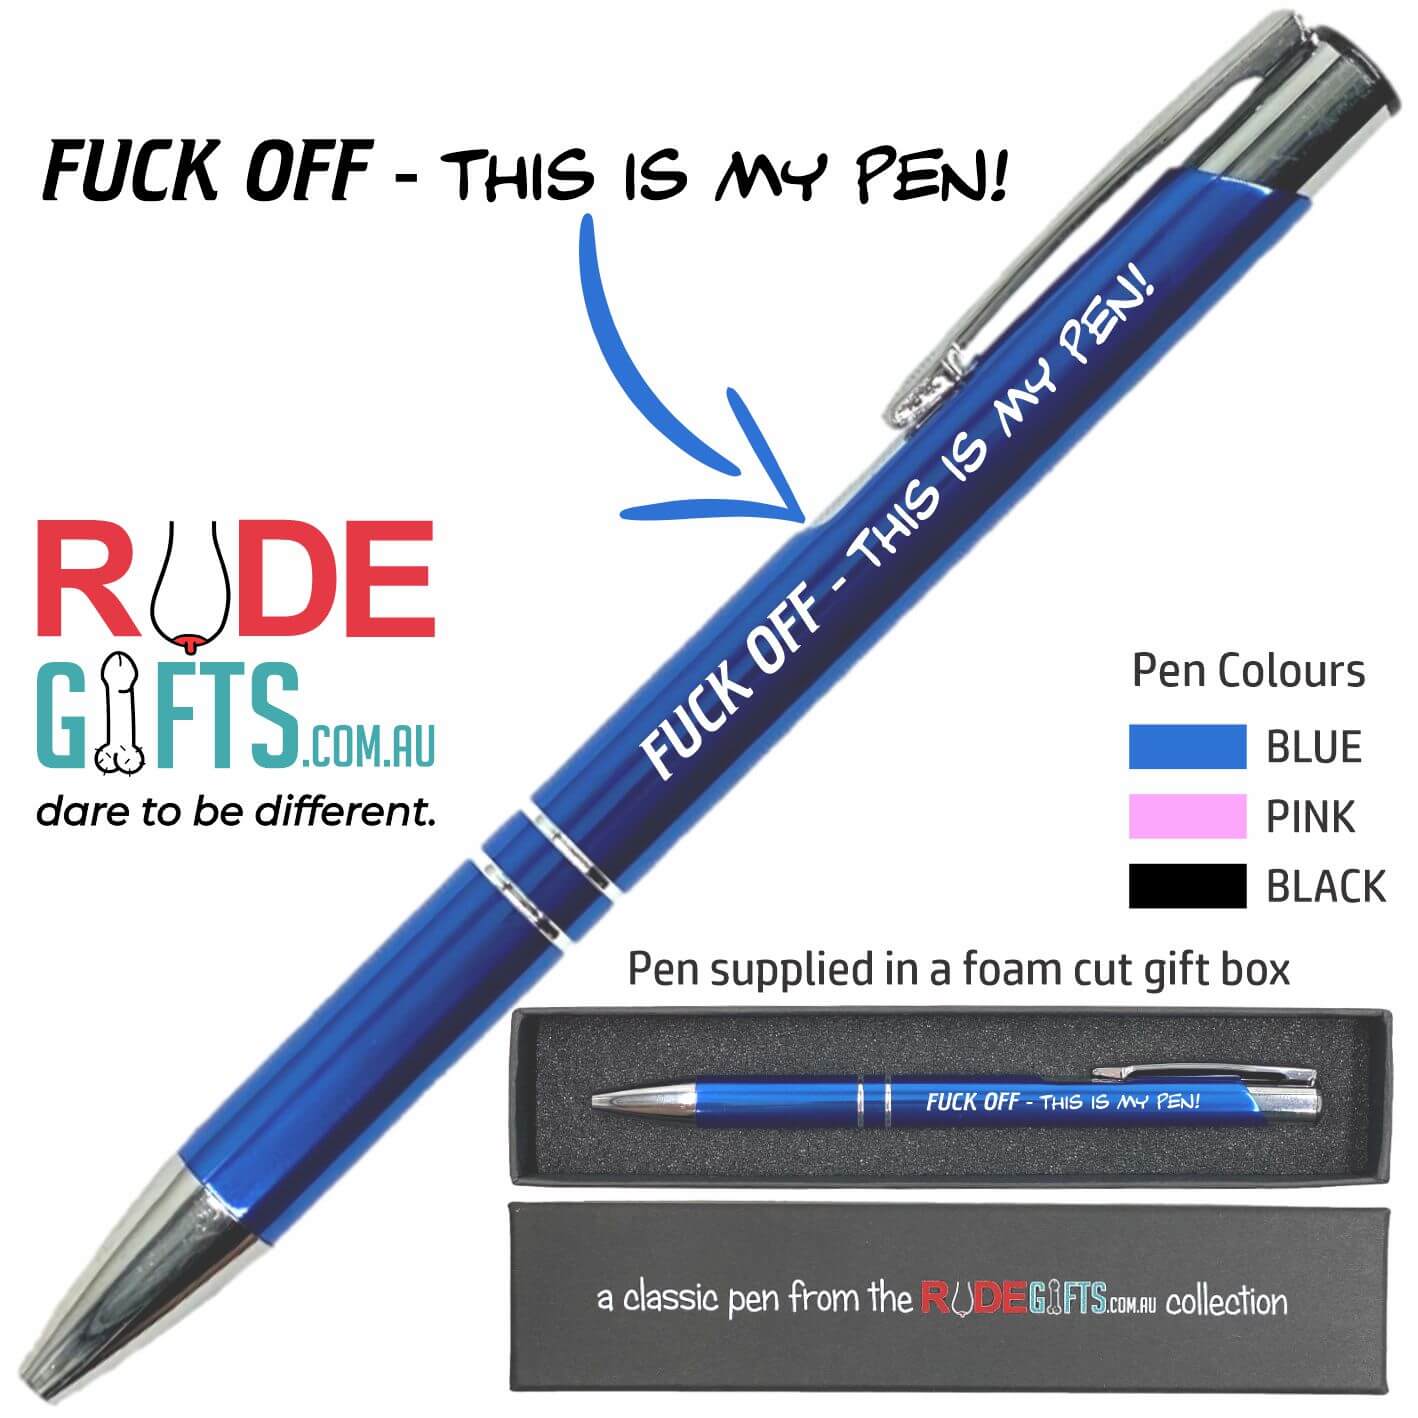 FUCK OFF - This is my pen!